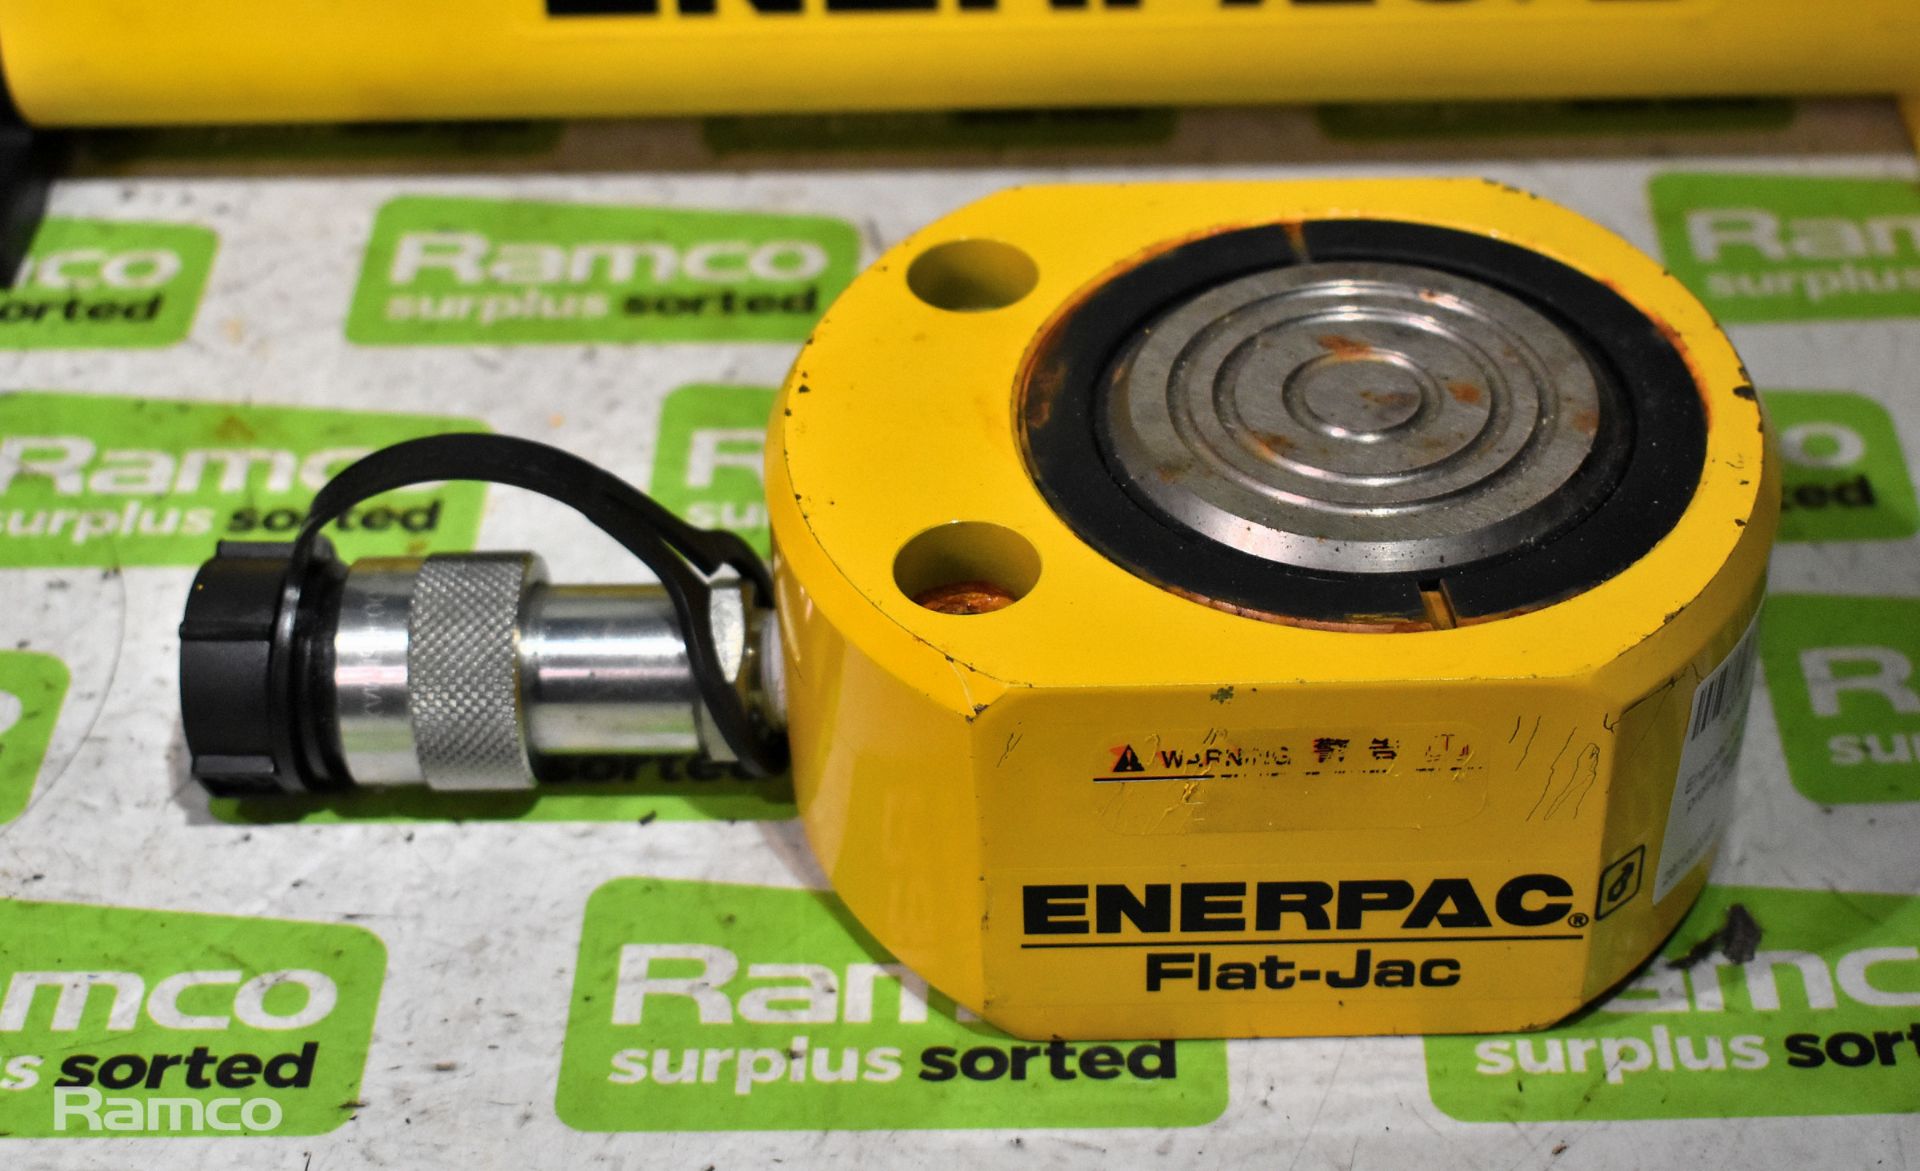 Enerpac P932 two speed hydraulic hand pump - 10000 PSI / 700 BAR max - Image 4 of 5